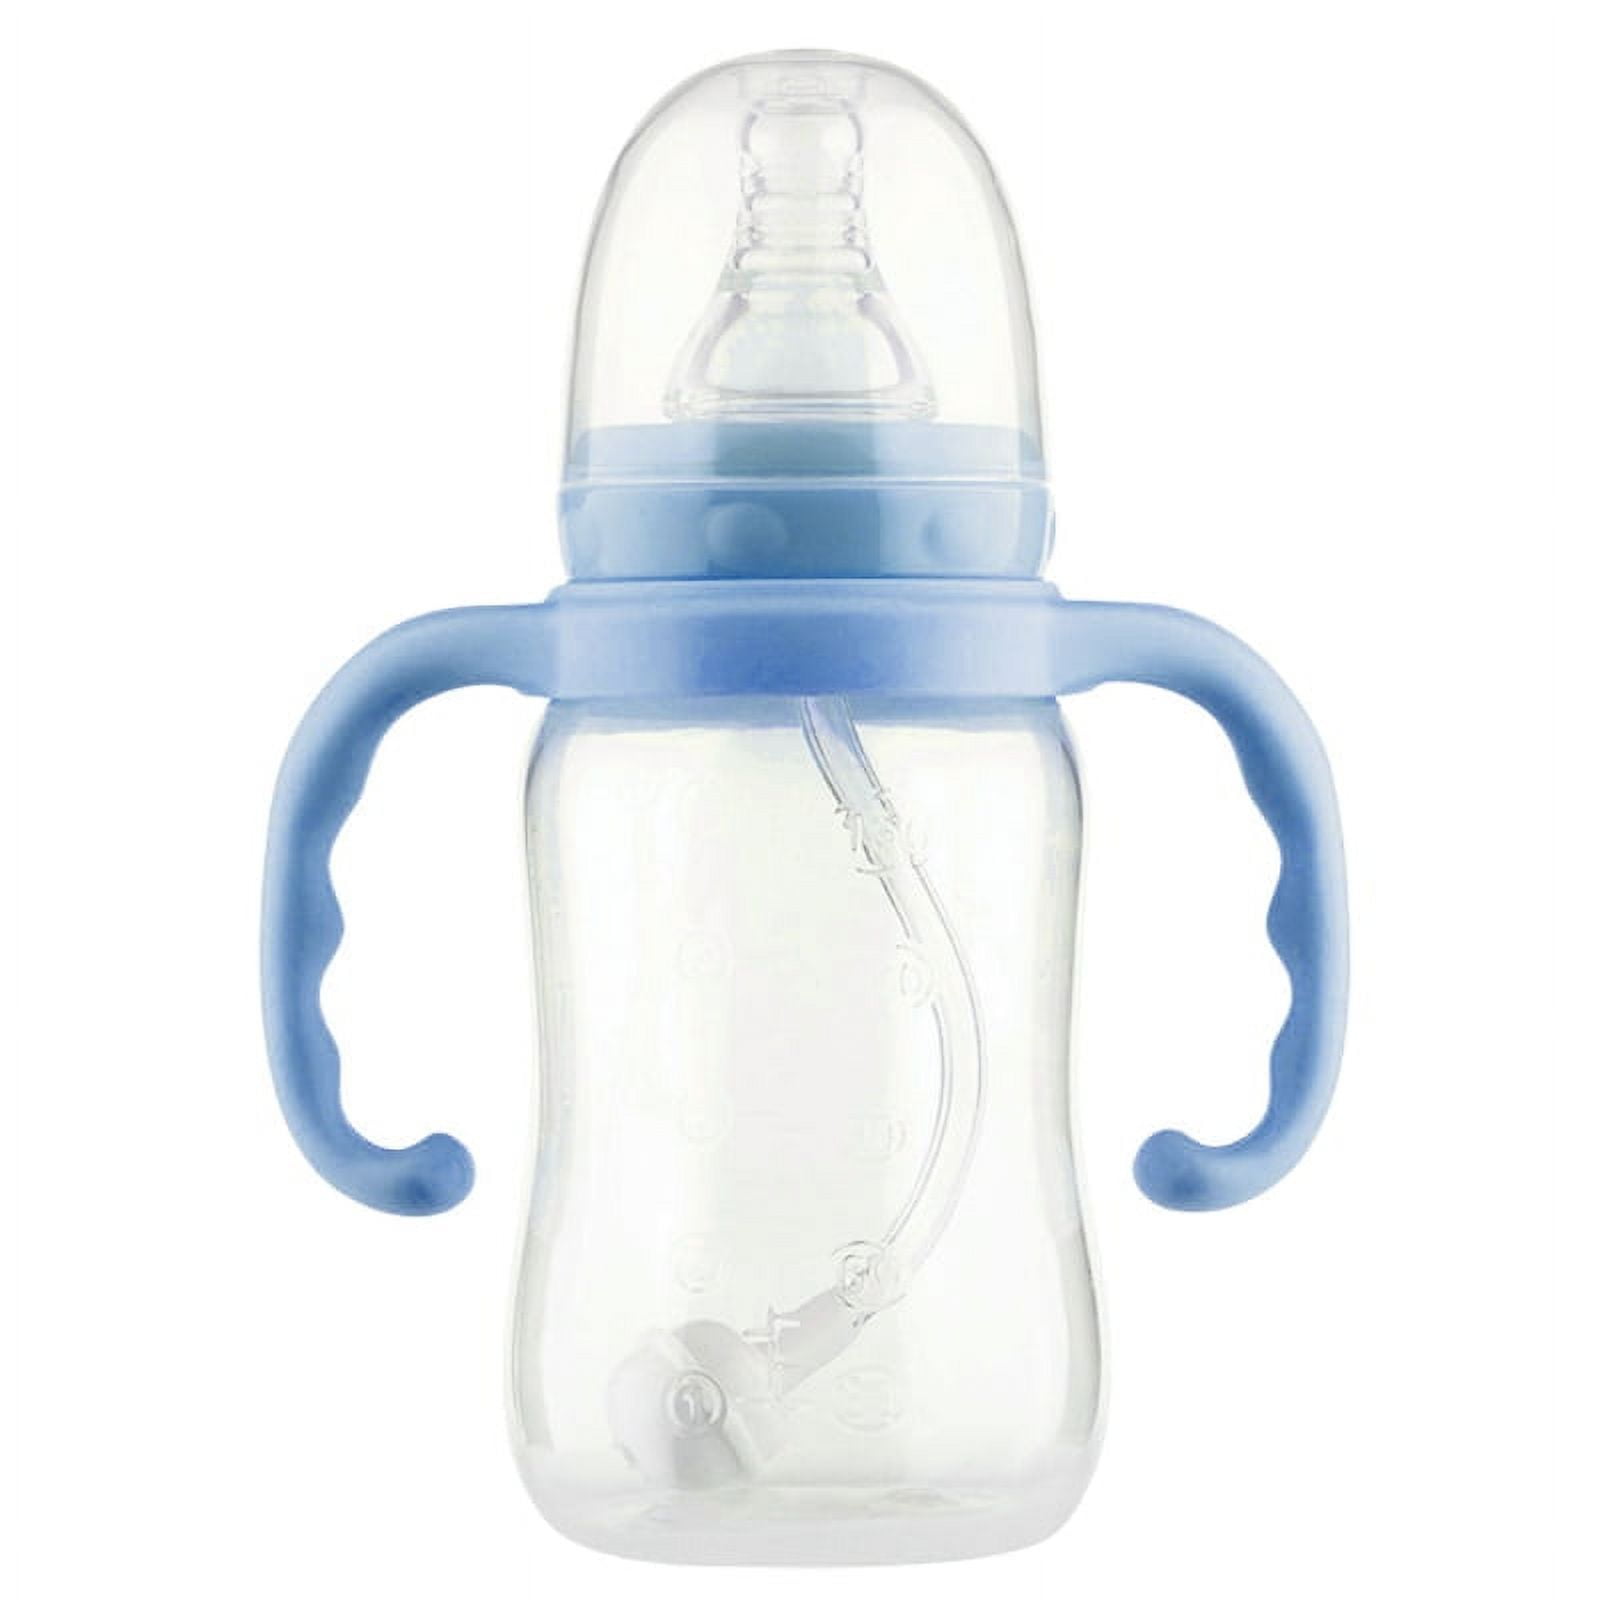 Custom BPA Free 240ml Or 120ml Silicone Baby Bottle Cover